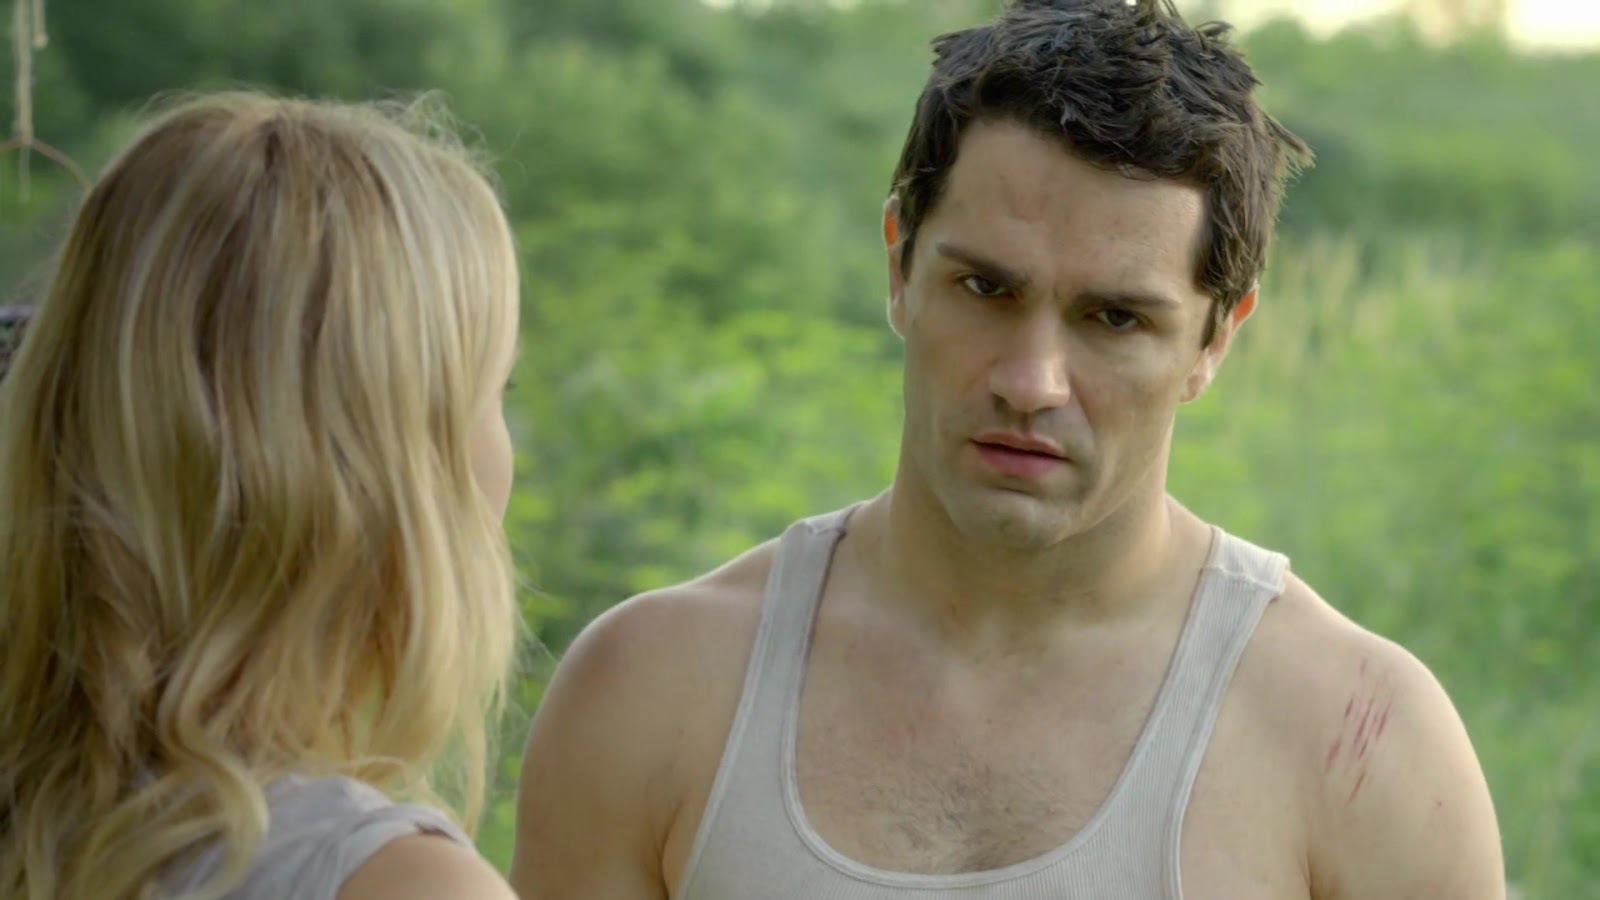 auscaps2.blogspot.com ausCAPS: Sam Witwer shirtless in Being Human